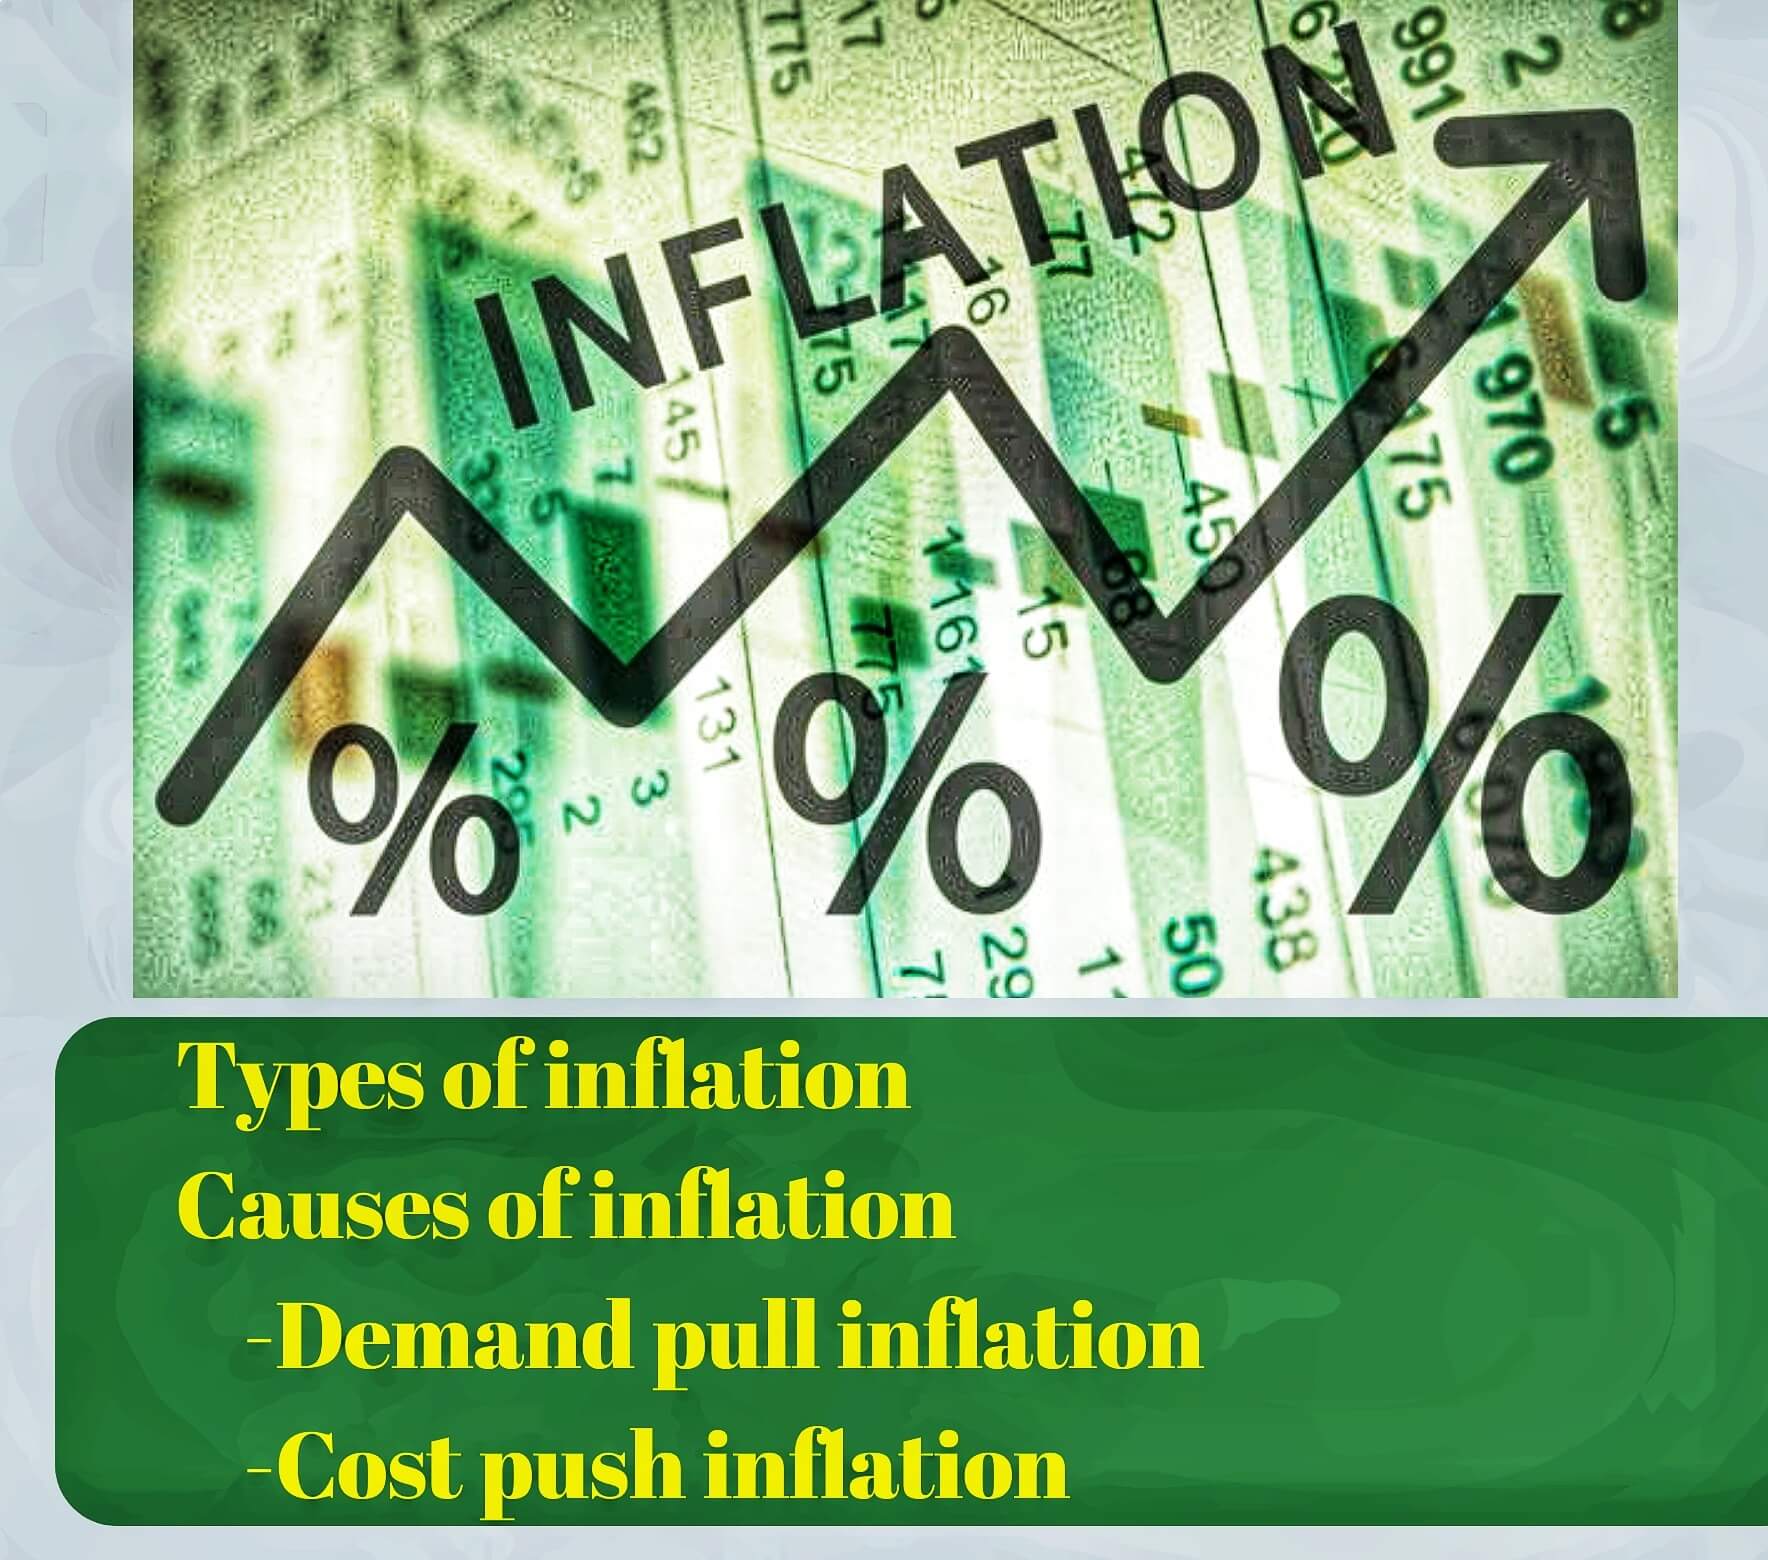 Inflation: Types of inflation, Causes of inflation and Measures to Control of Inflation